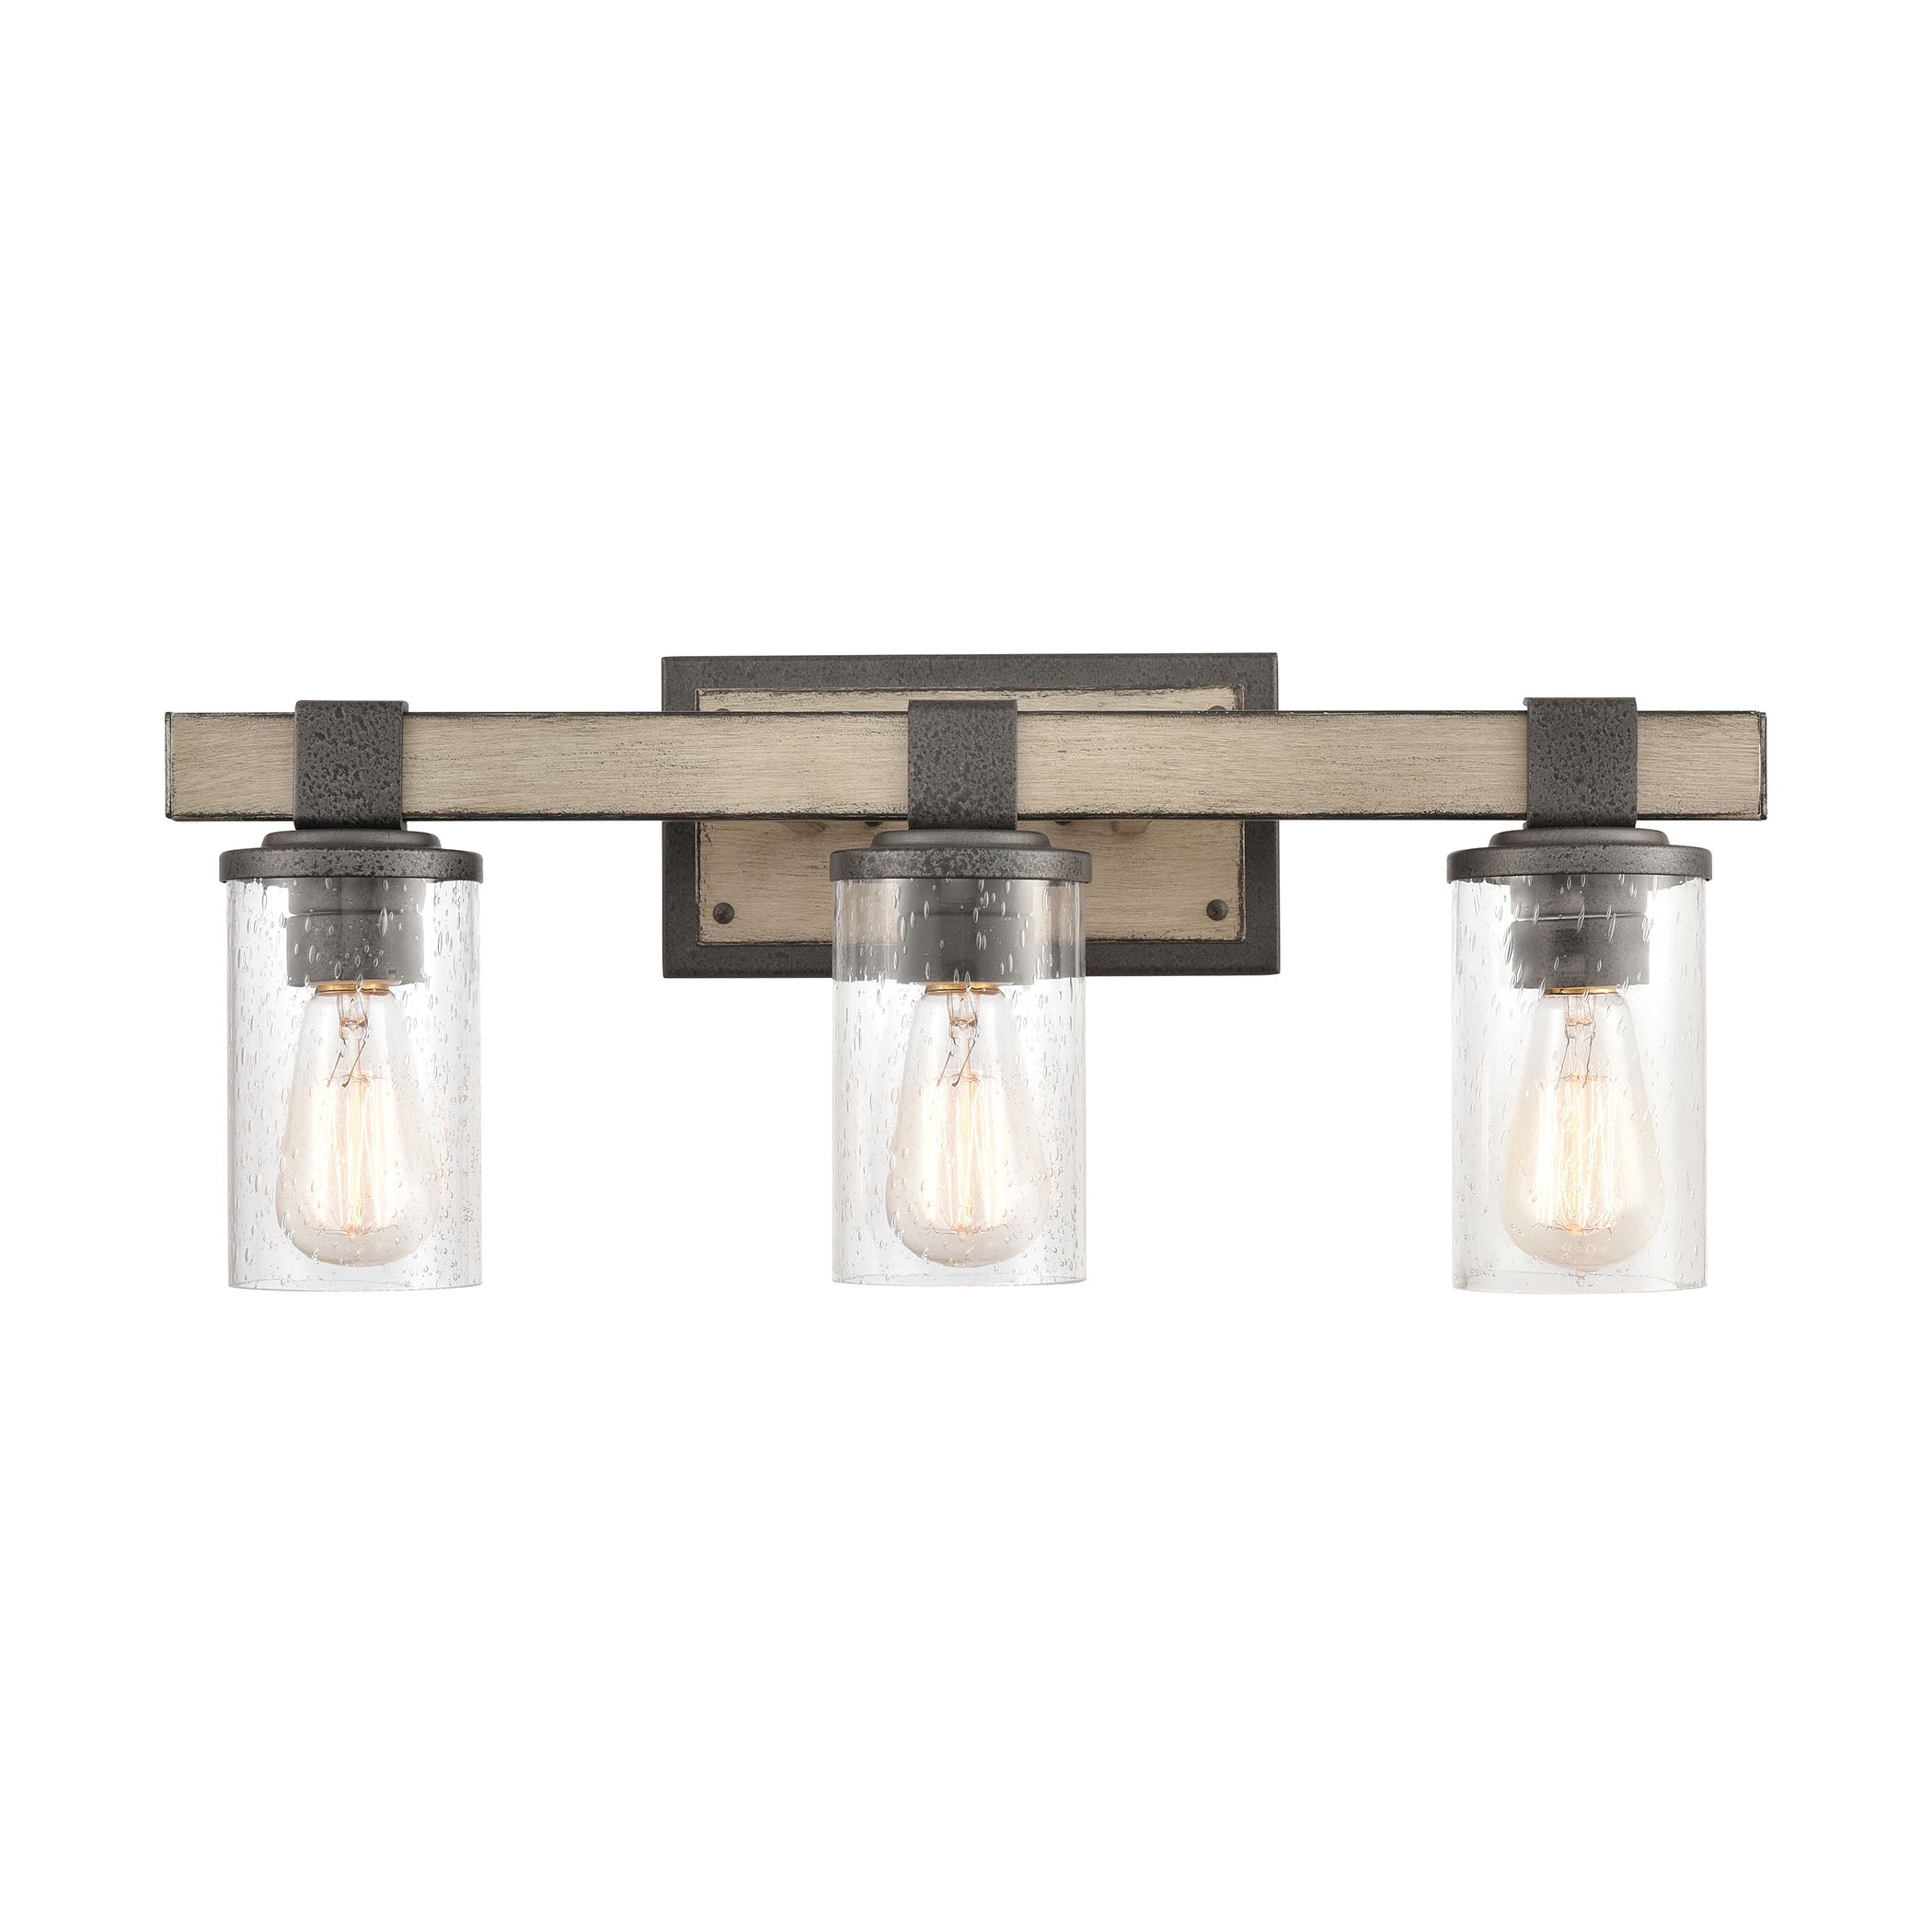 ELK Lighting 89142/3 Crenshaw 3-Light Vanity Light in Anvil Iron and Distressed Antique Graywood with Seedy Glass